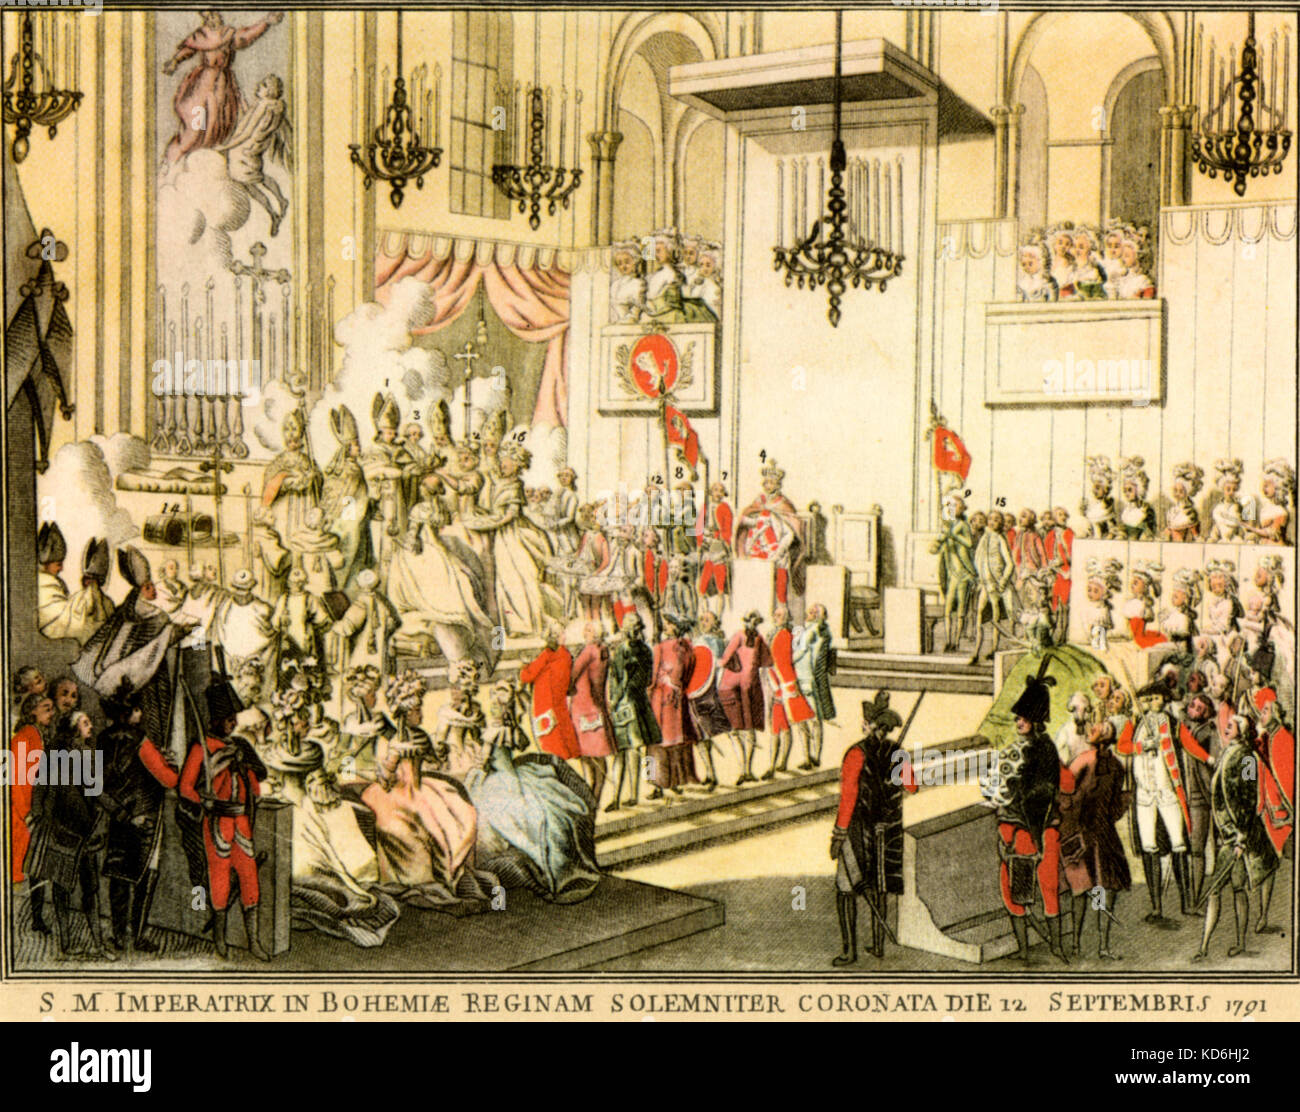 Coronation of  Leopold II's wife, Maria Louise in Prague in 1791.  Mozart's opera 'La Clemenza di Tito'  was composed  in honour of  the coronation of Leopold II. Stock Photo